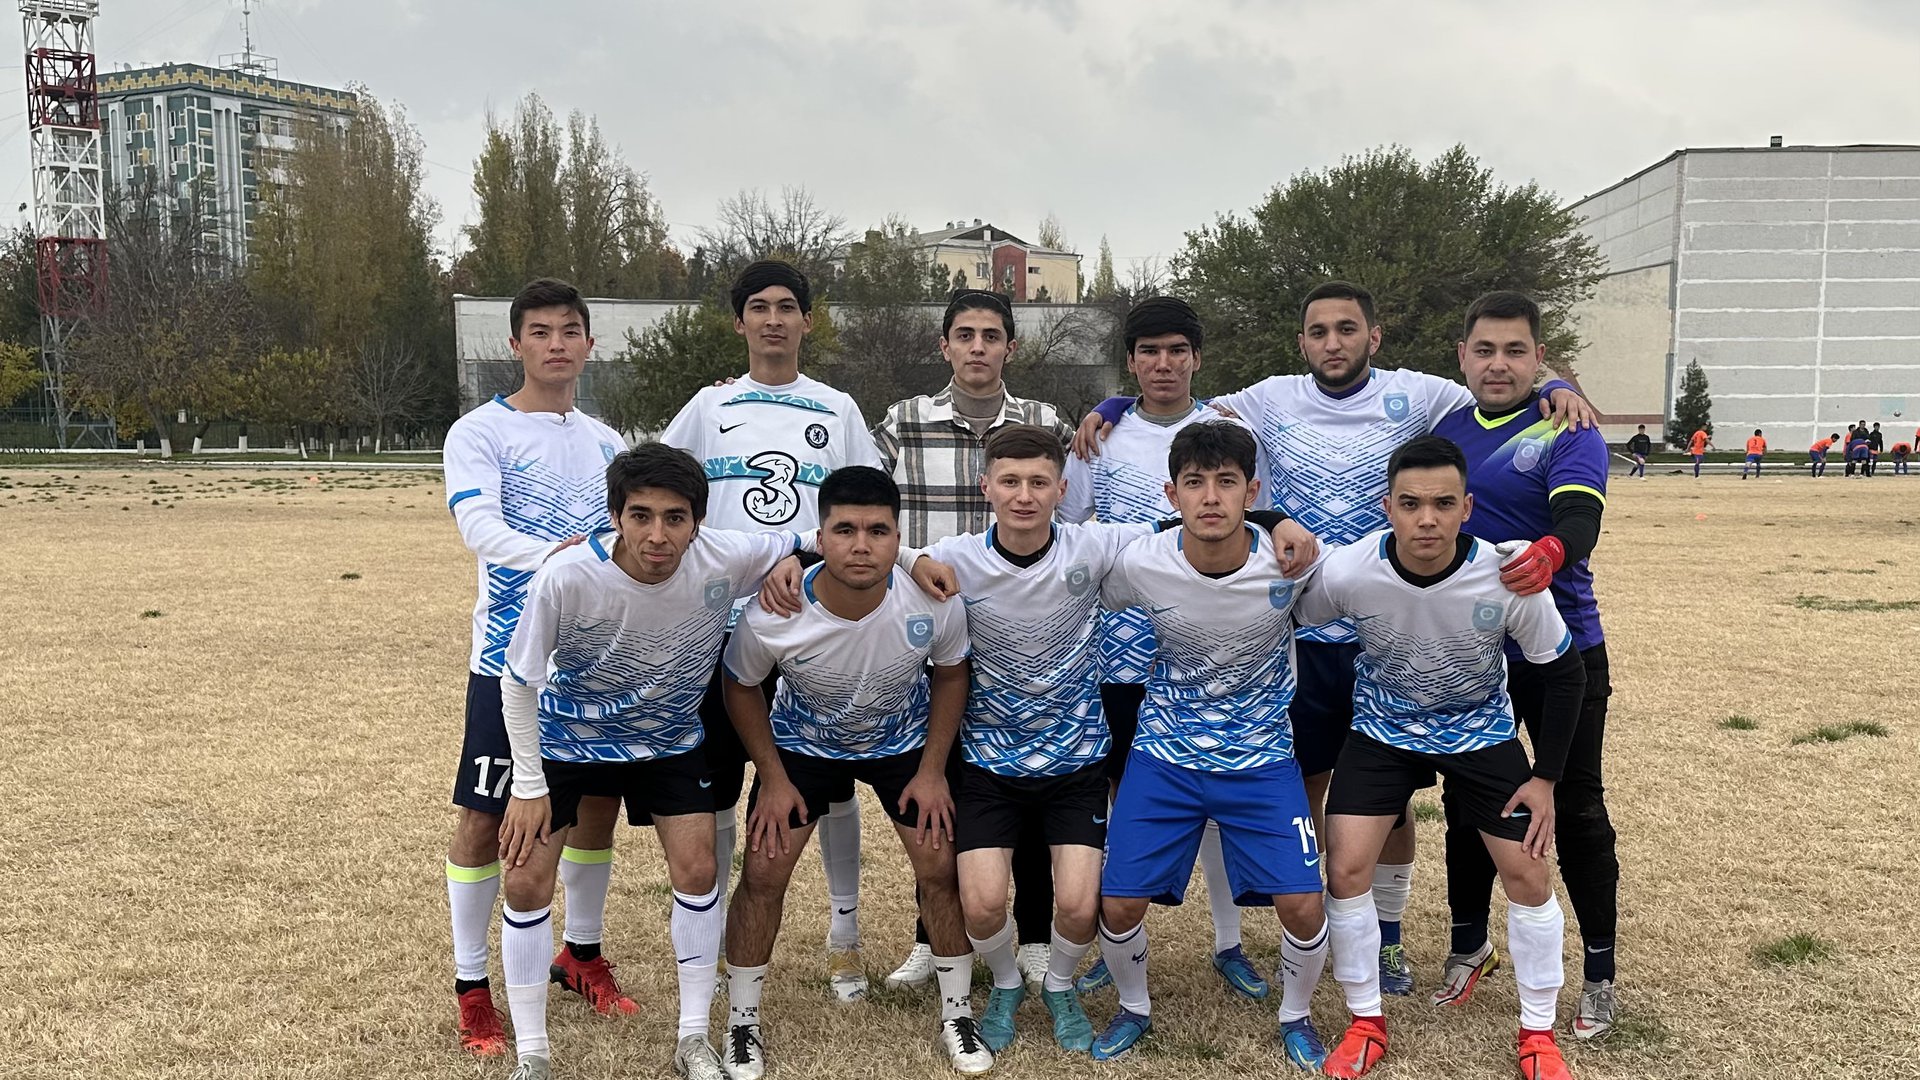 In the football tournament "Minister's Cup" among higher educational institutions, the KIUT (YTIT) team took an honorable third place